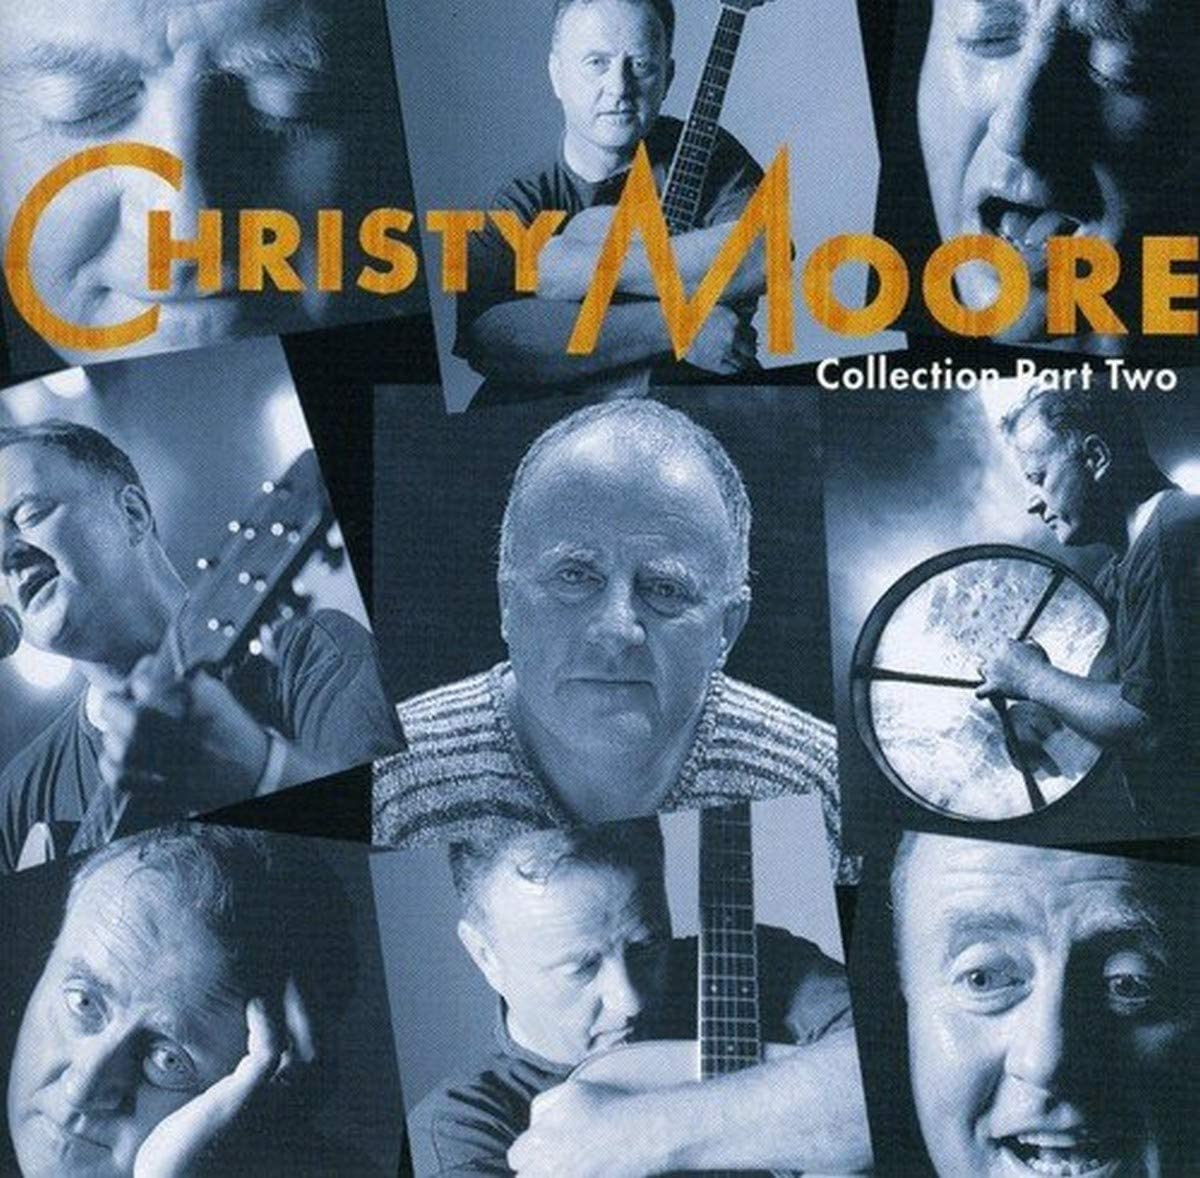 Christy Moore - Collection Part Two - USED CD